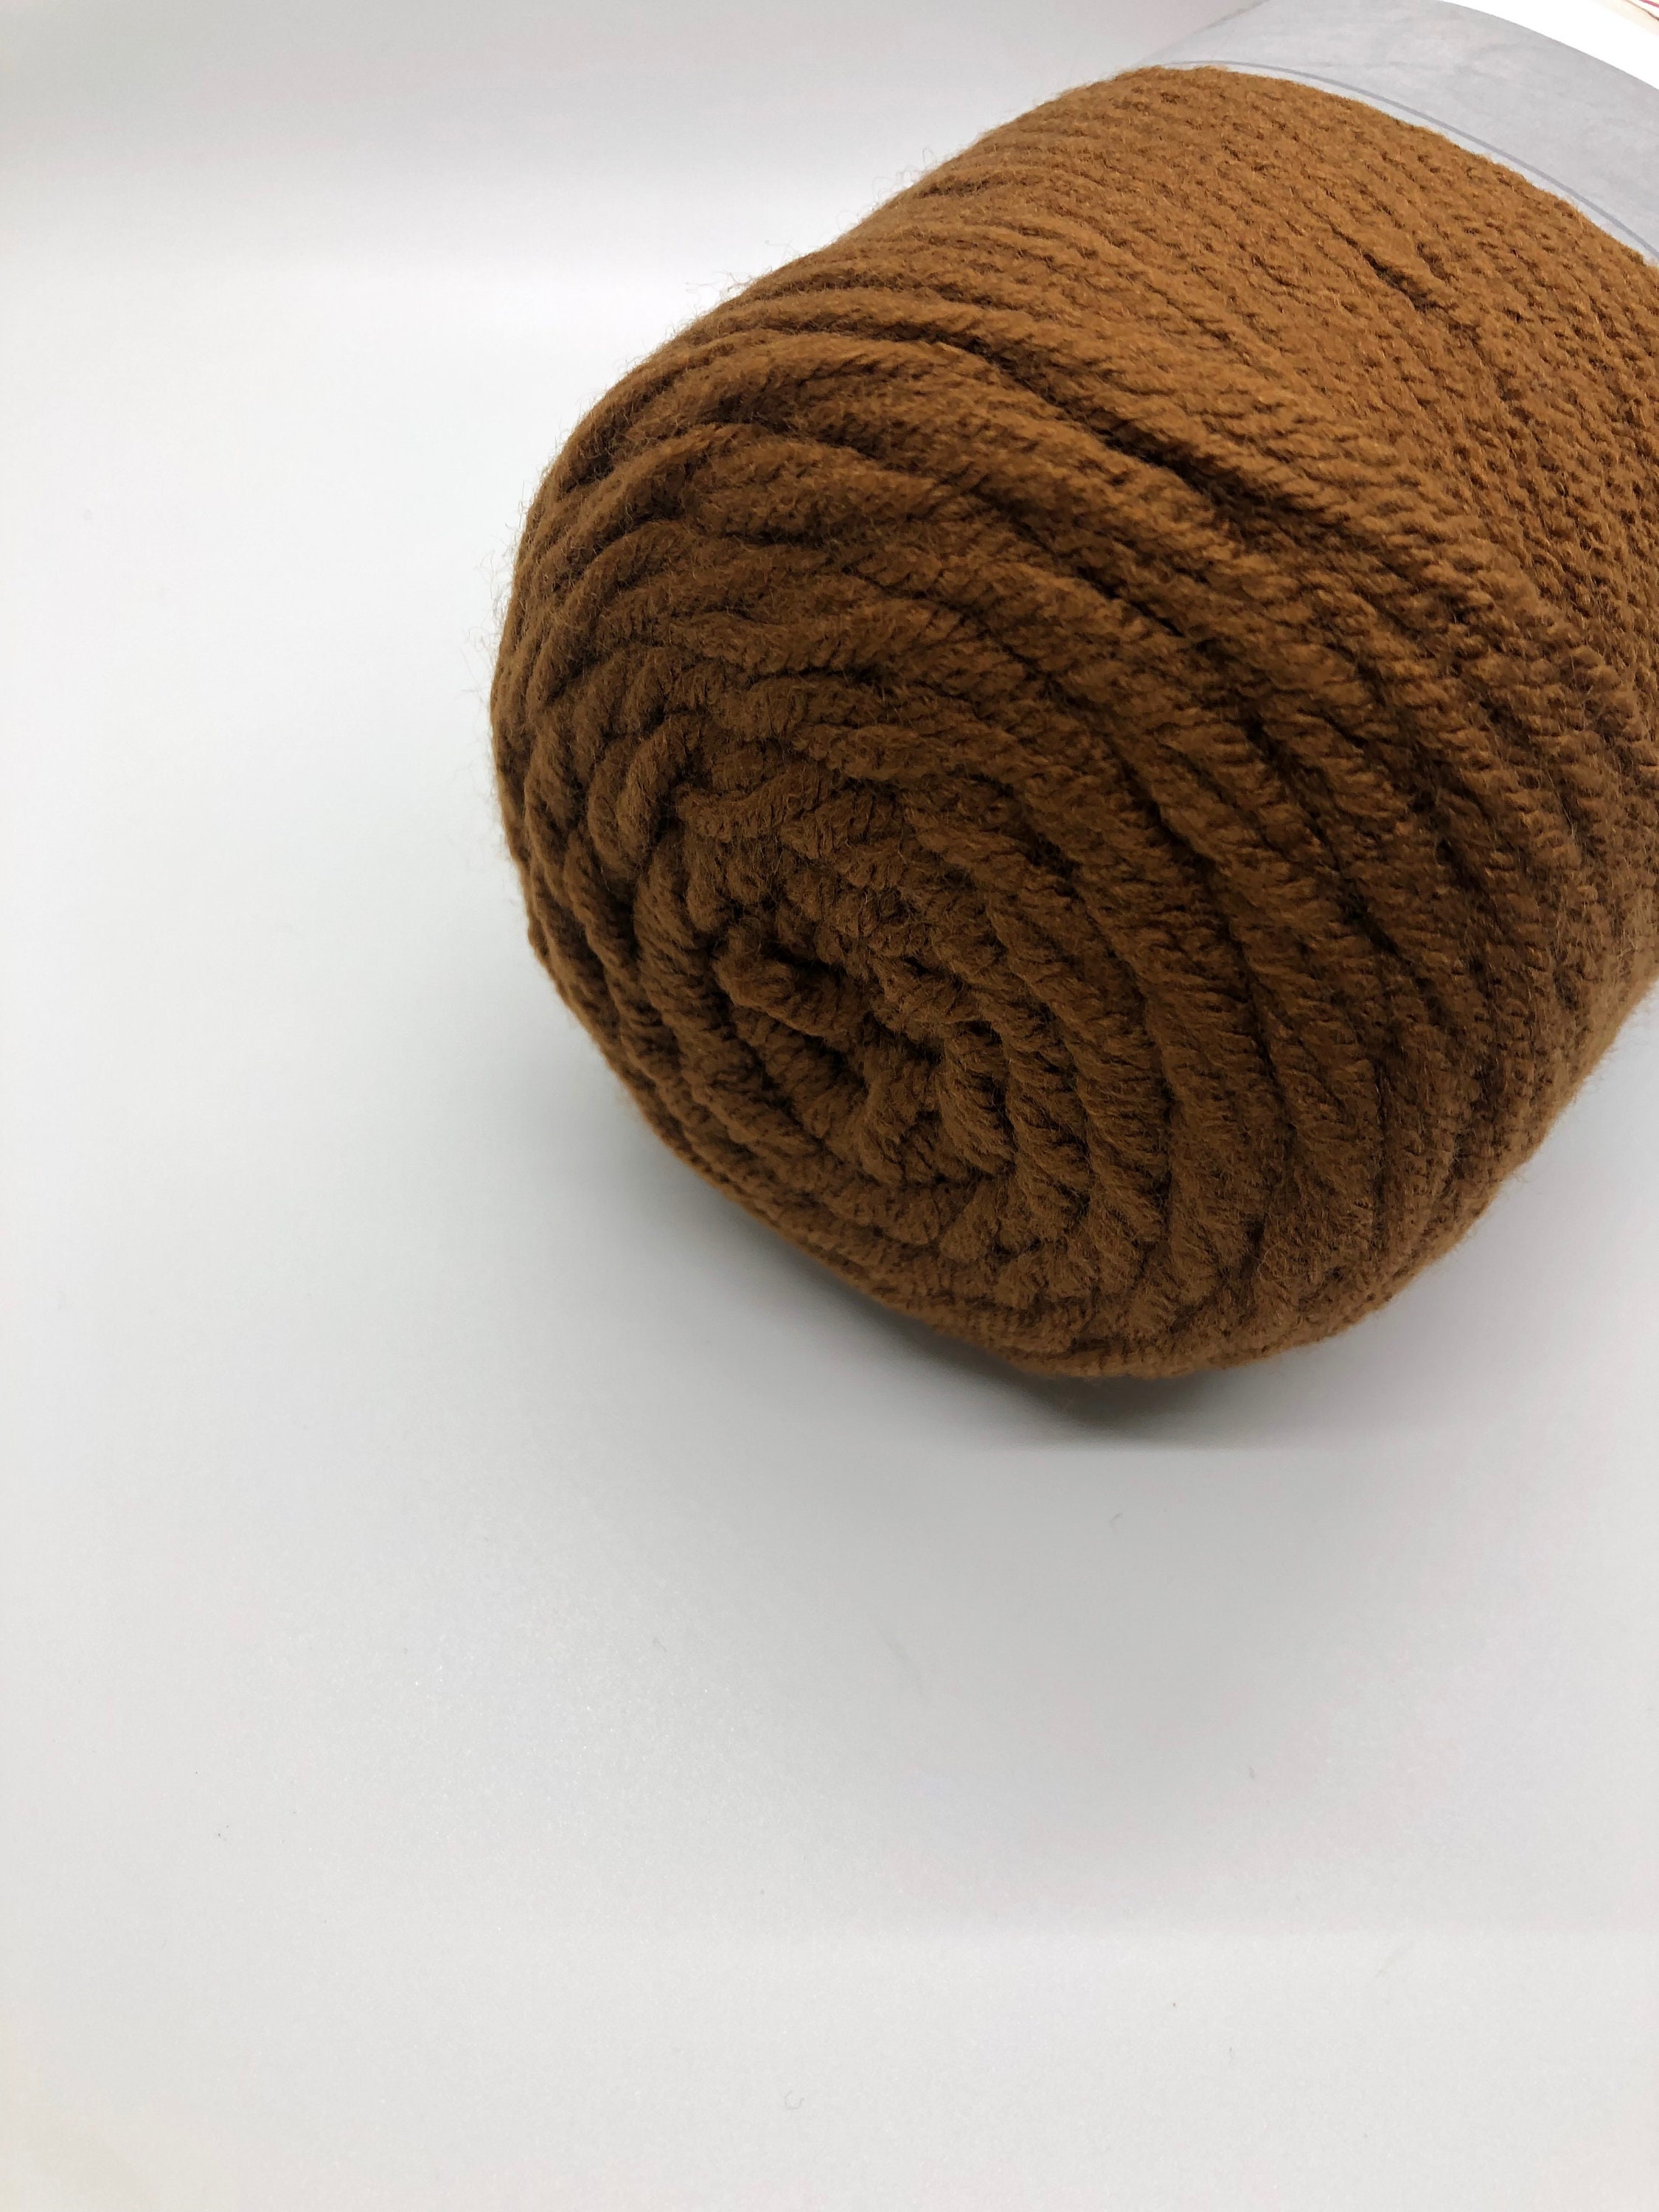 Anyone know of a dark-ish beige/tan yarn like the one in this pic